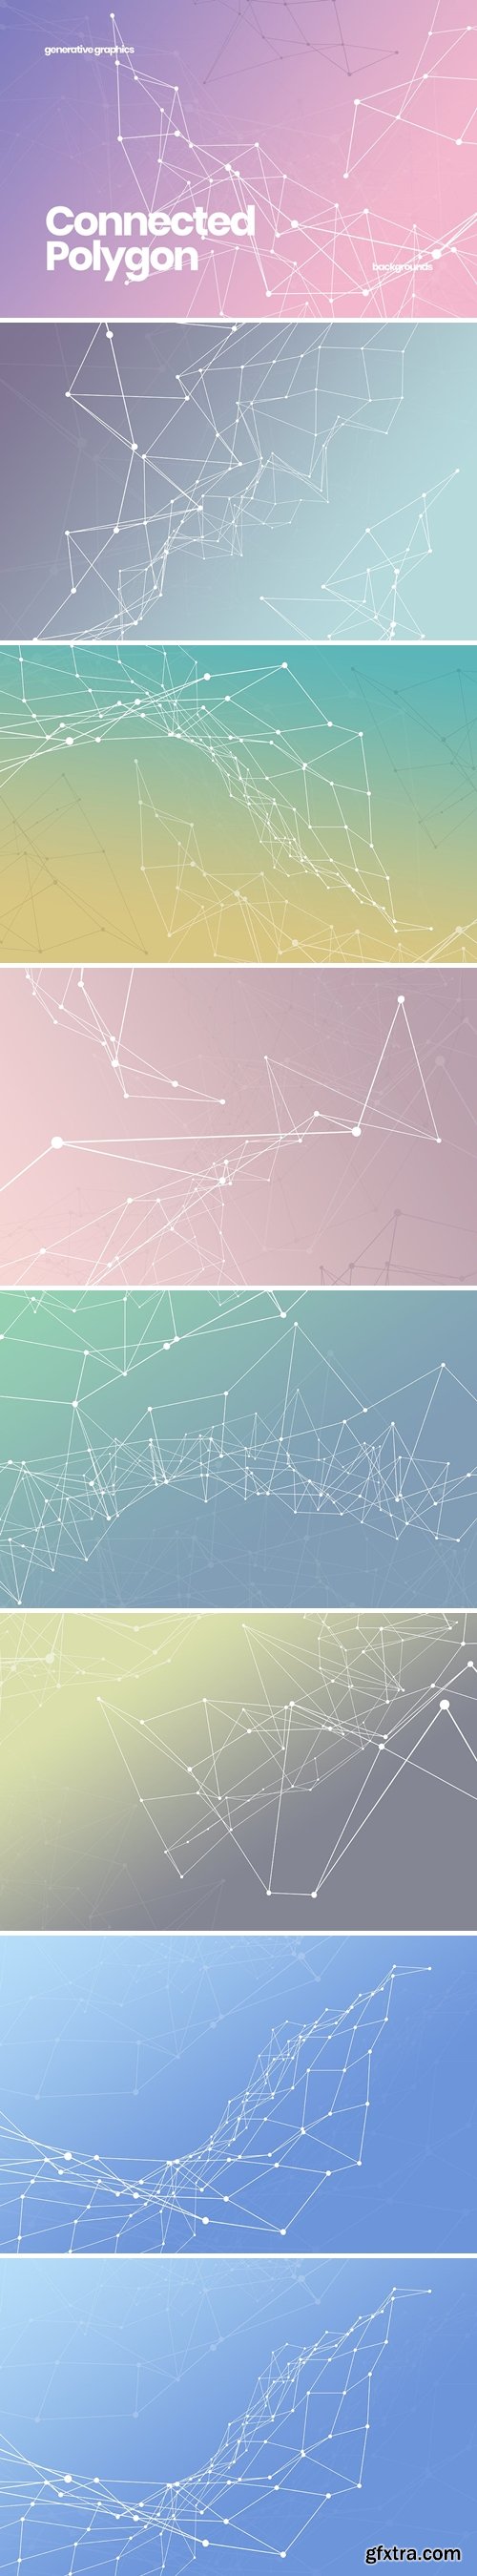 Connected Polygon Backgrounds